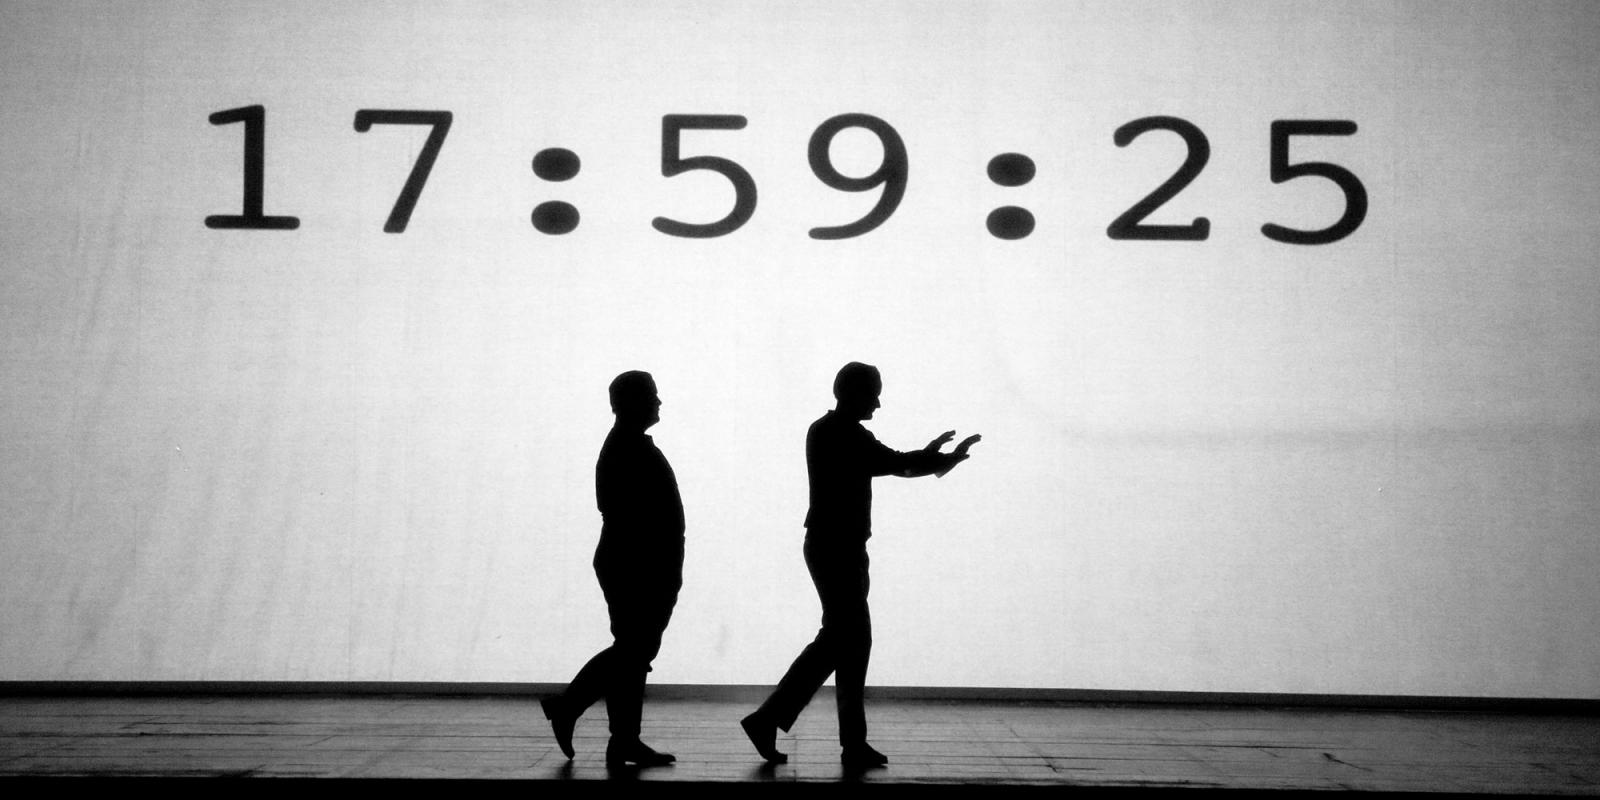 Orphée and Heurtebise walk silhouetted against a white background, with a bold timecode projected onto it.